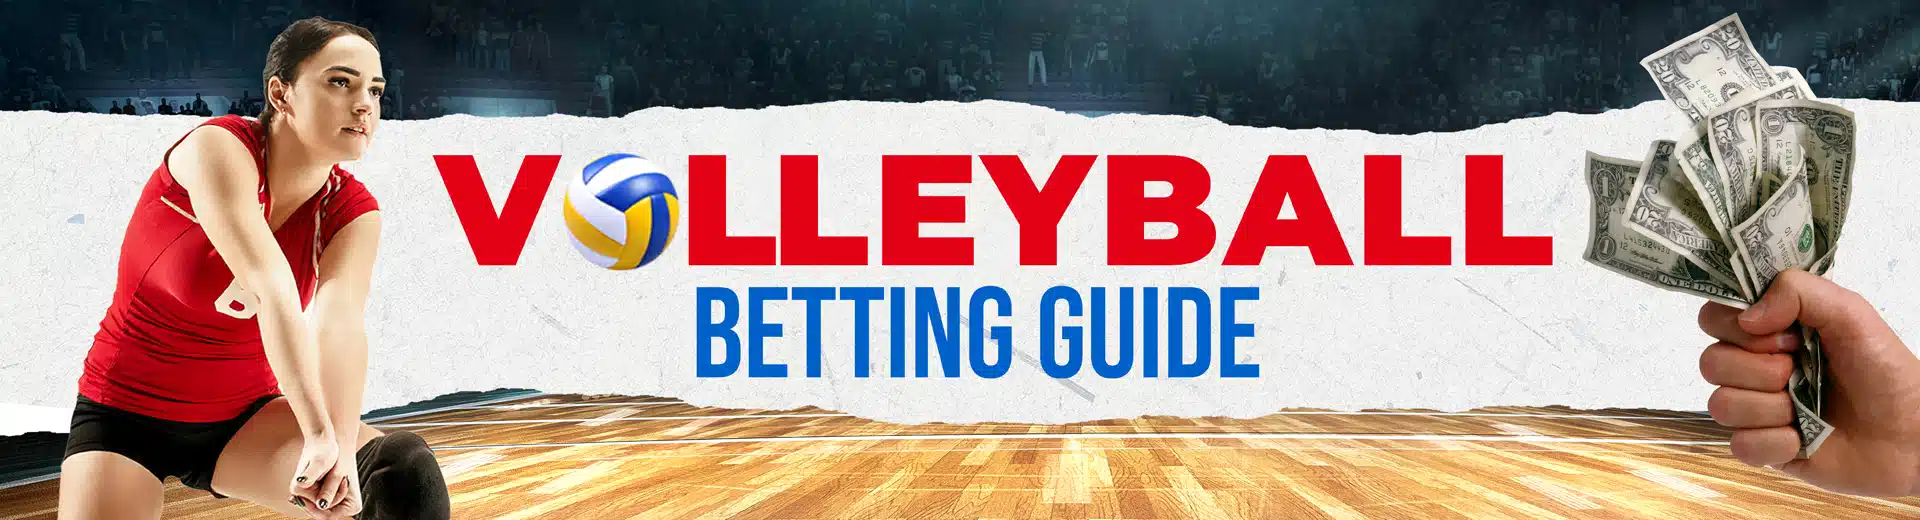 Volleyball Betting Guide at OKBET Sports Betting Philippines - OKBET volleyball betting